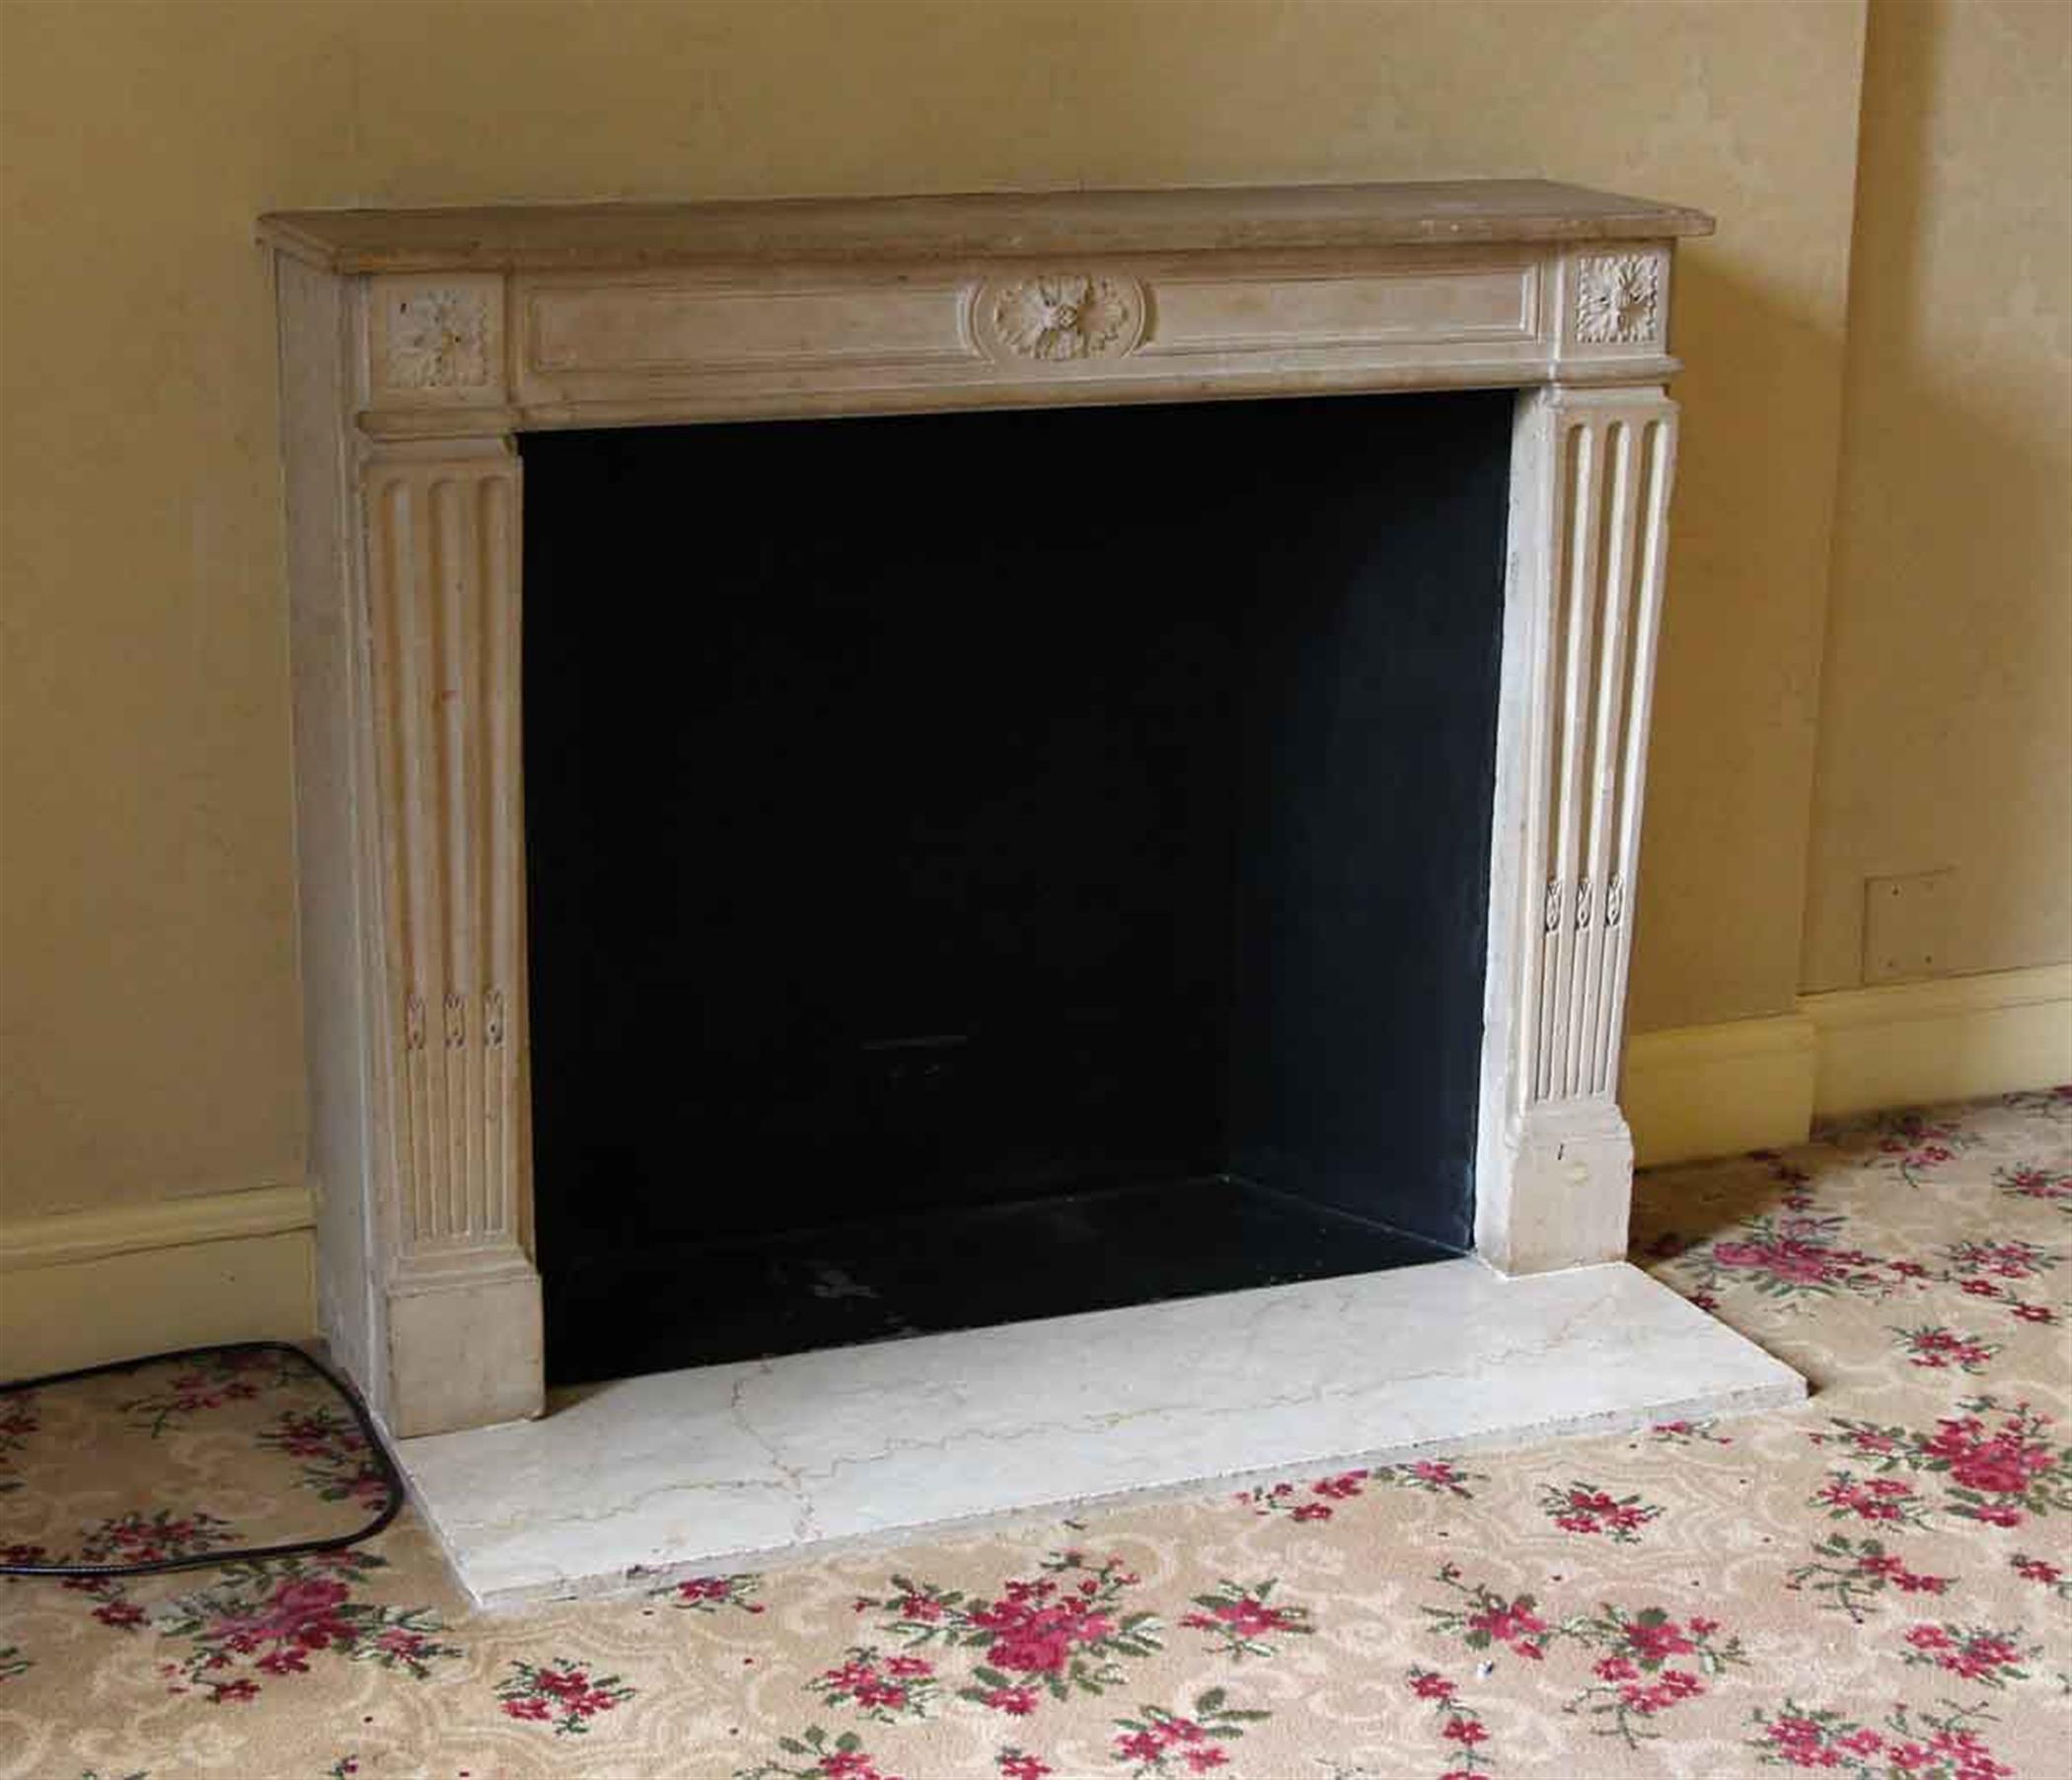 1910s Louis XVI French Regency style tan limestone mantel. Carved legs and floral motifs on the top plinths and the middle of the header. This mantel was one of a group of antique mantels imported from Europe and installed in the NYC Waldorf Astoria